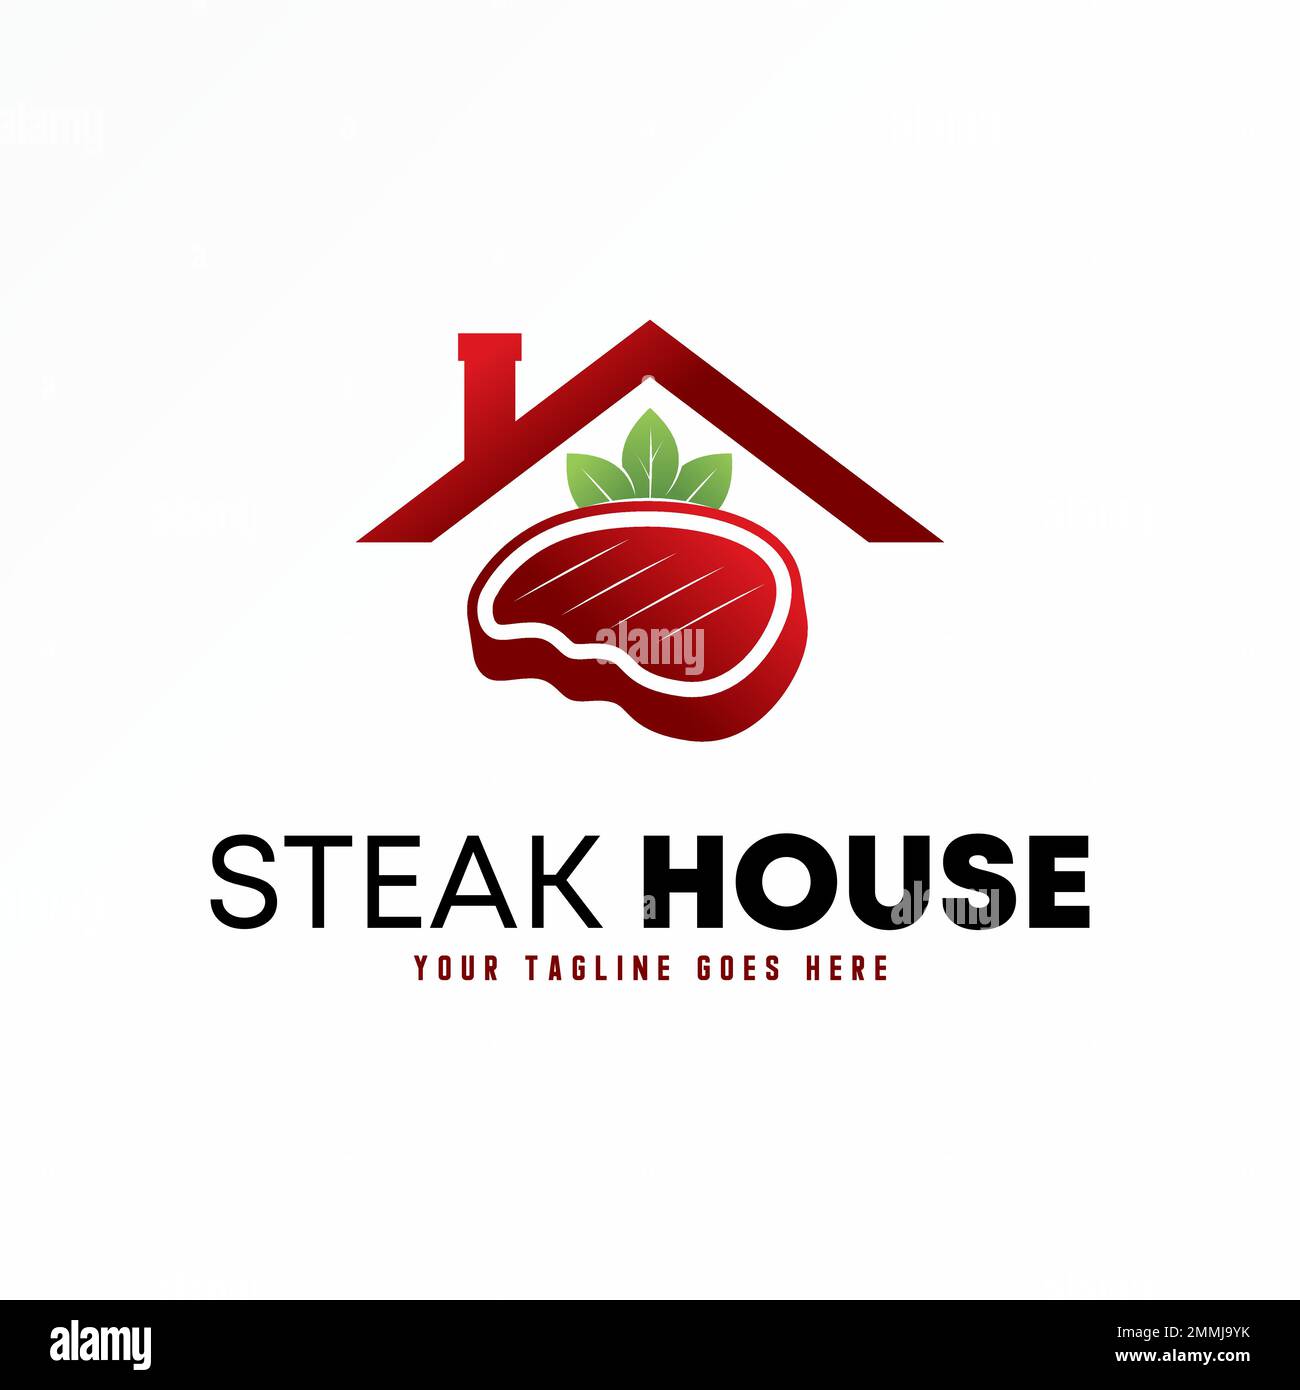 Unique Roof house, Meat, and Leaf image graphic icon logo design abstract concept vector stock. Can be used as a symbol related to food or restaurant Stock Vector